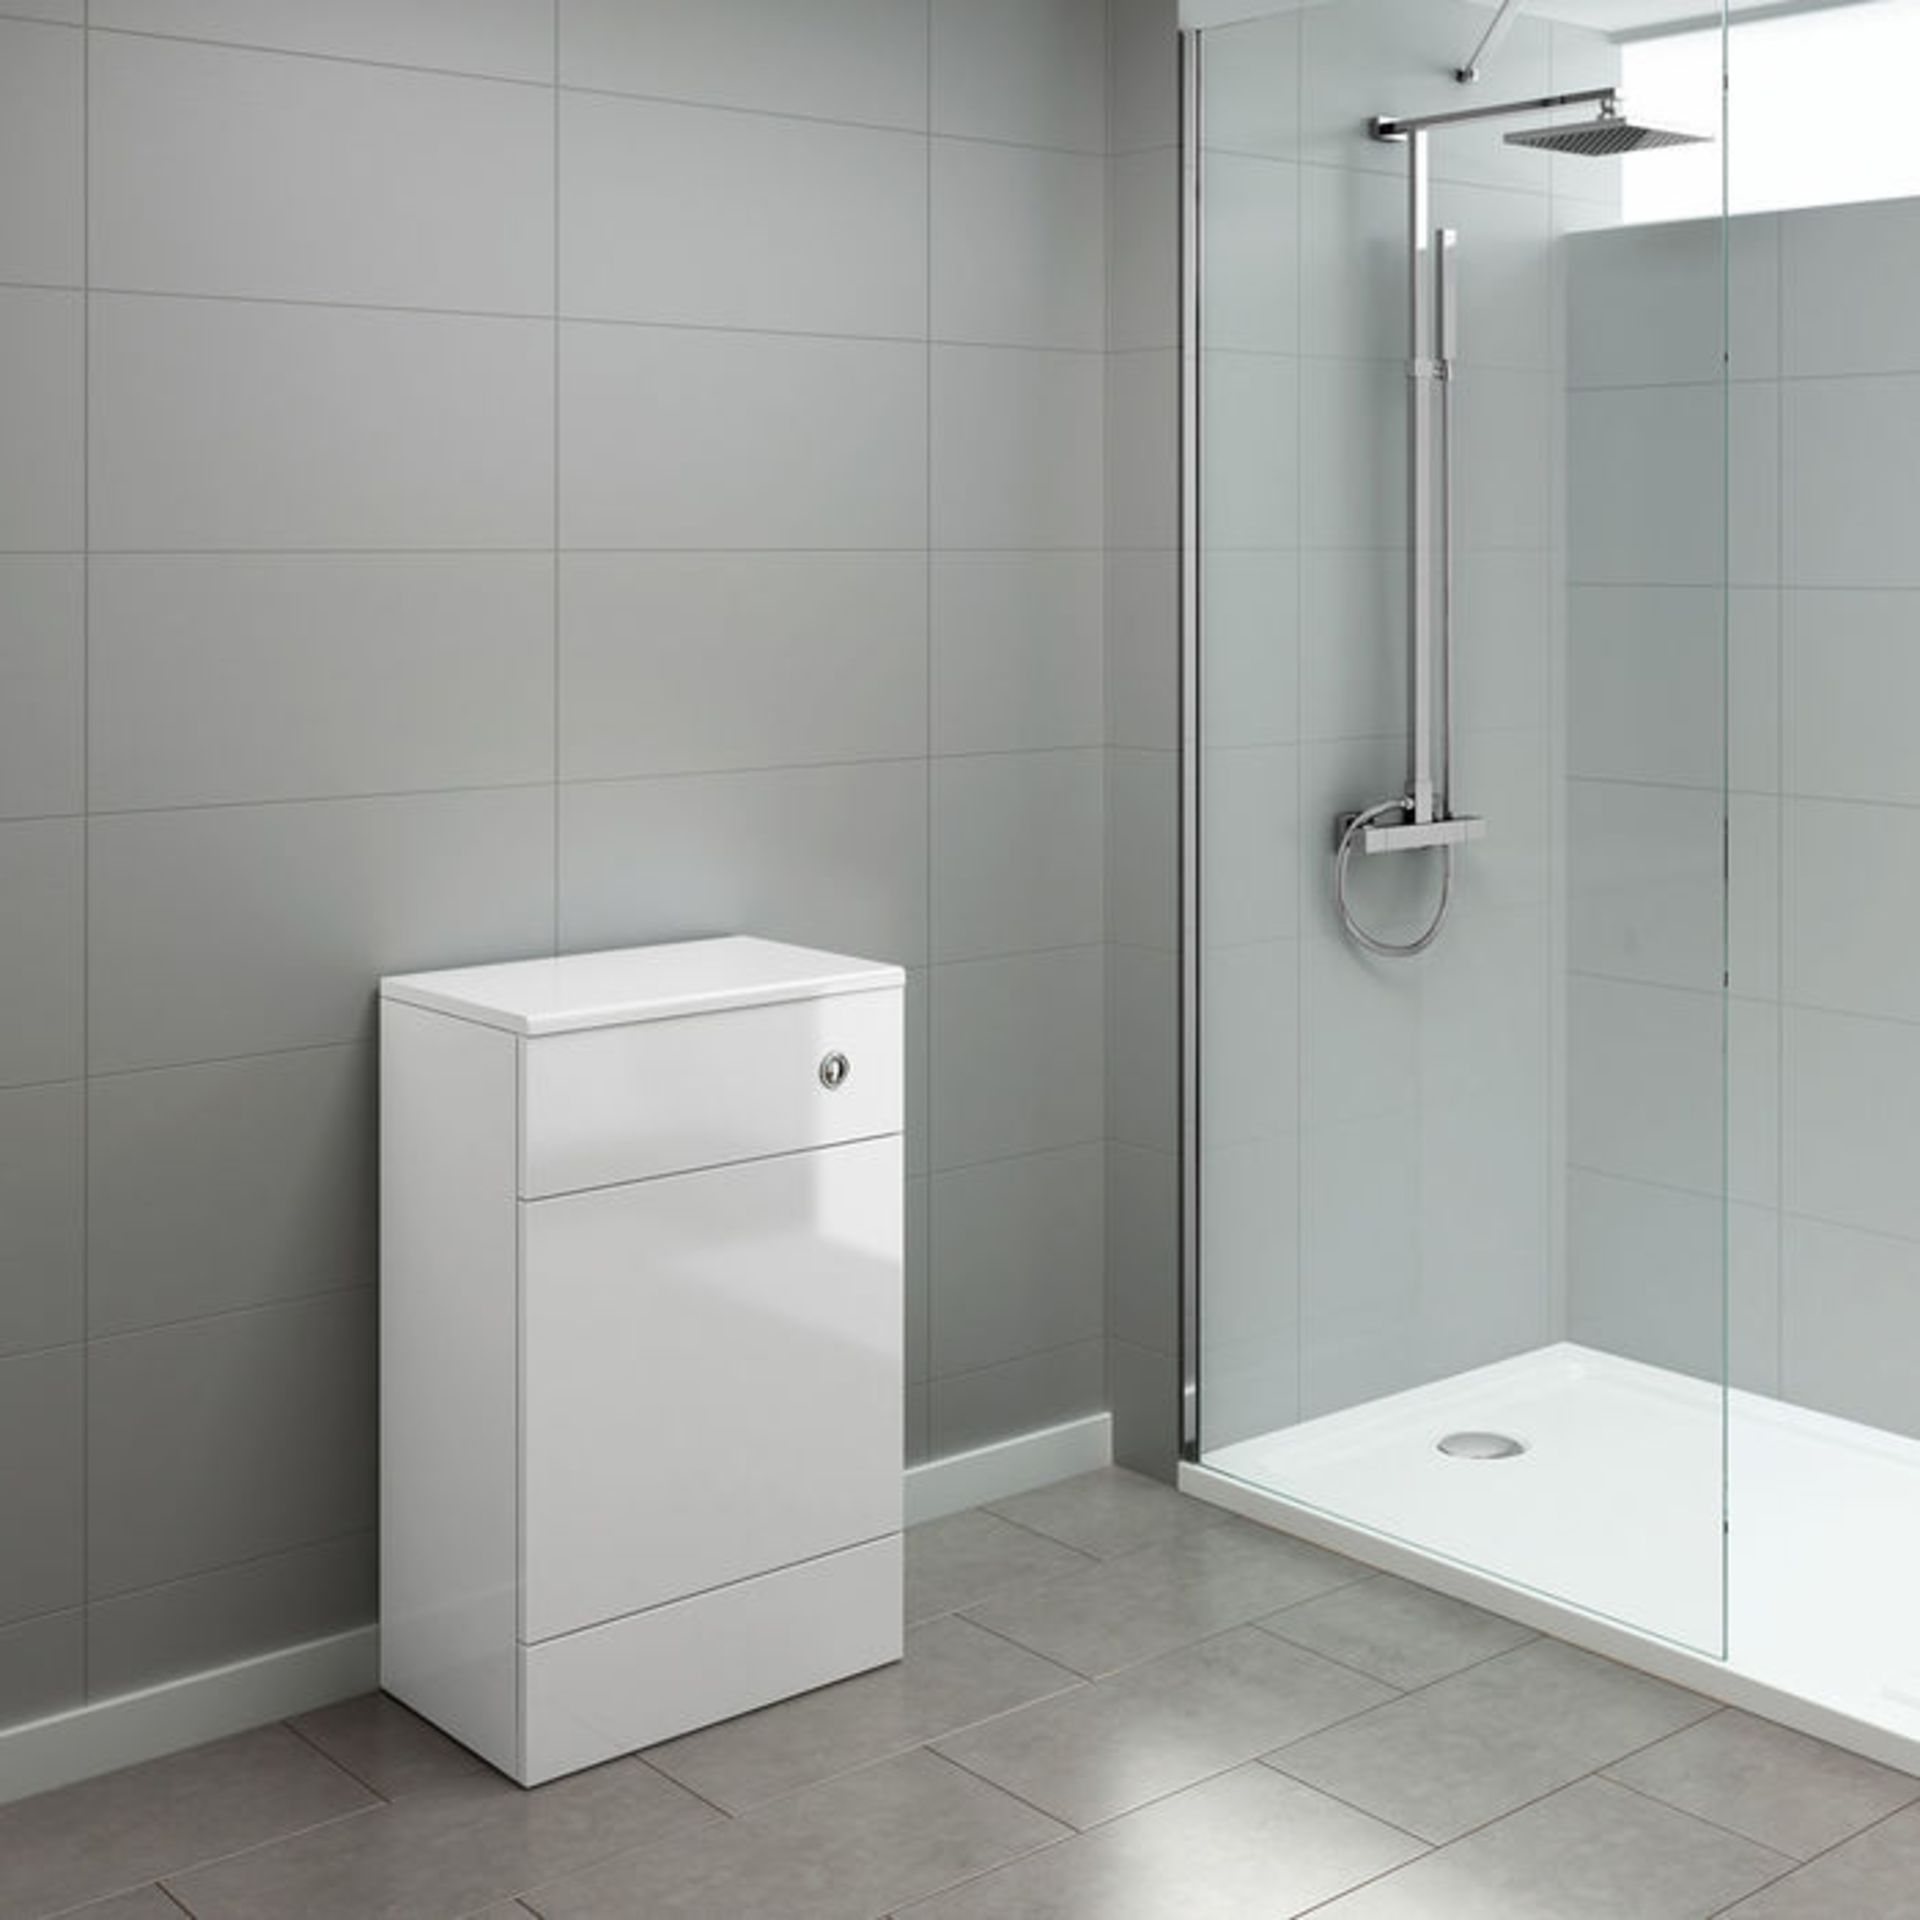 (HM141) 500mm Harper Gloss White Back To Wall Toilet Unit. RRP £119.99. Our discreet unit clev... - Image 2 of 4